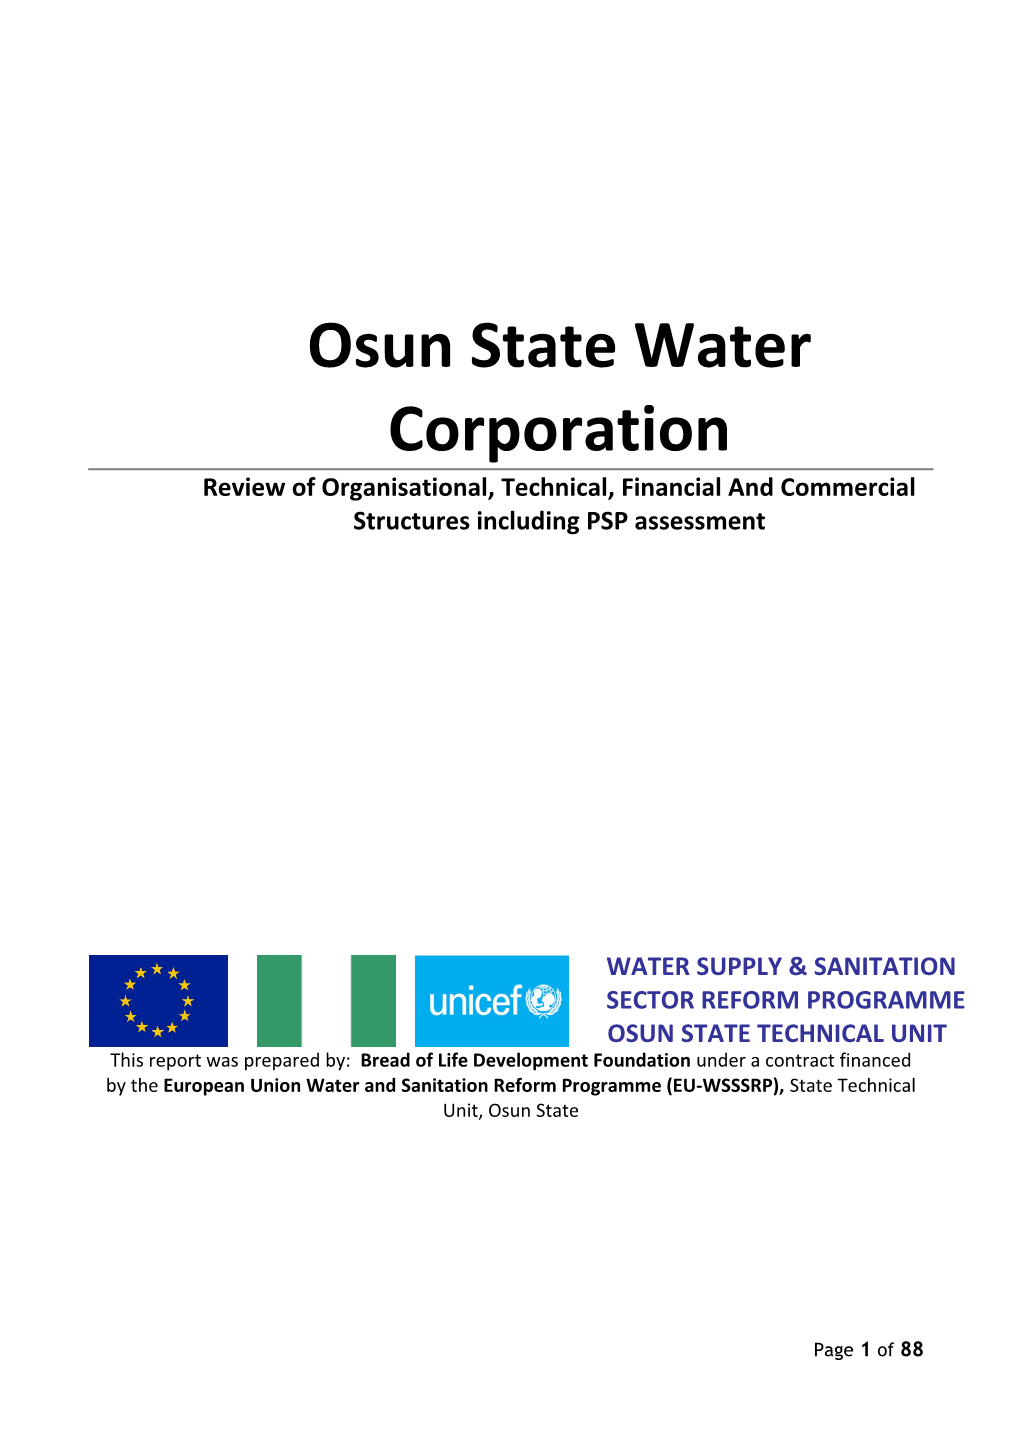 Consultancy Study for the Restructuring of Osun State Water Corporation (OSWC) Conducted